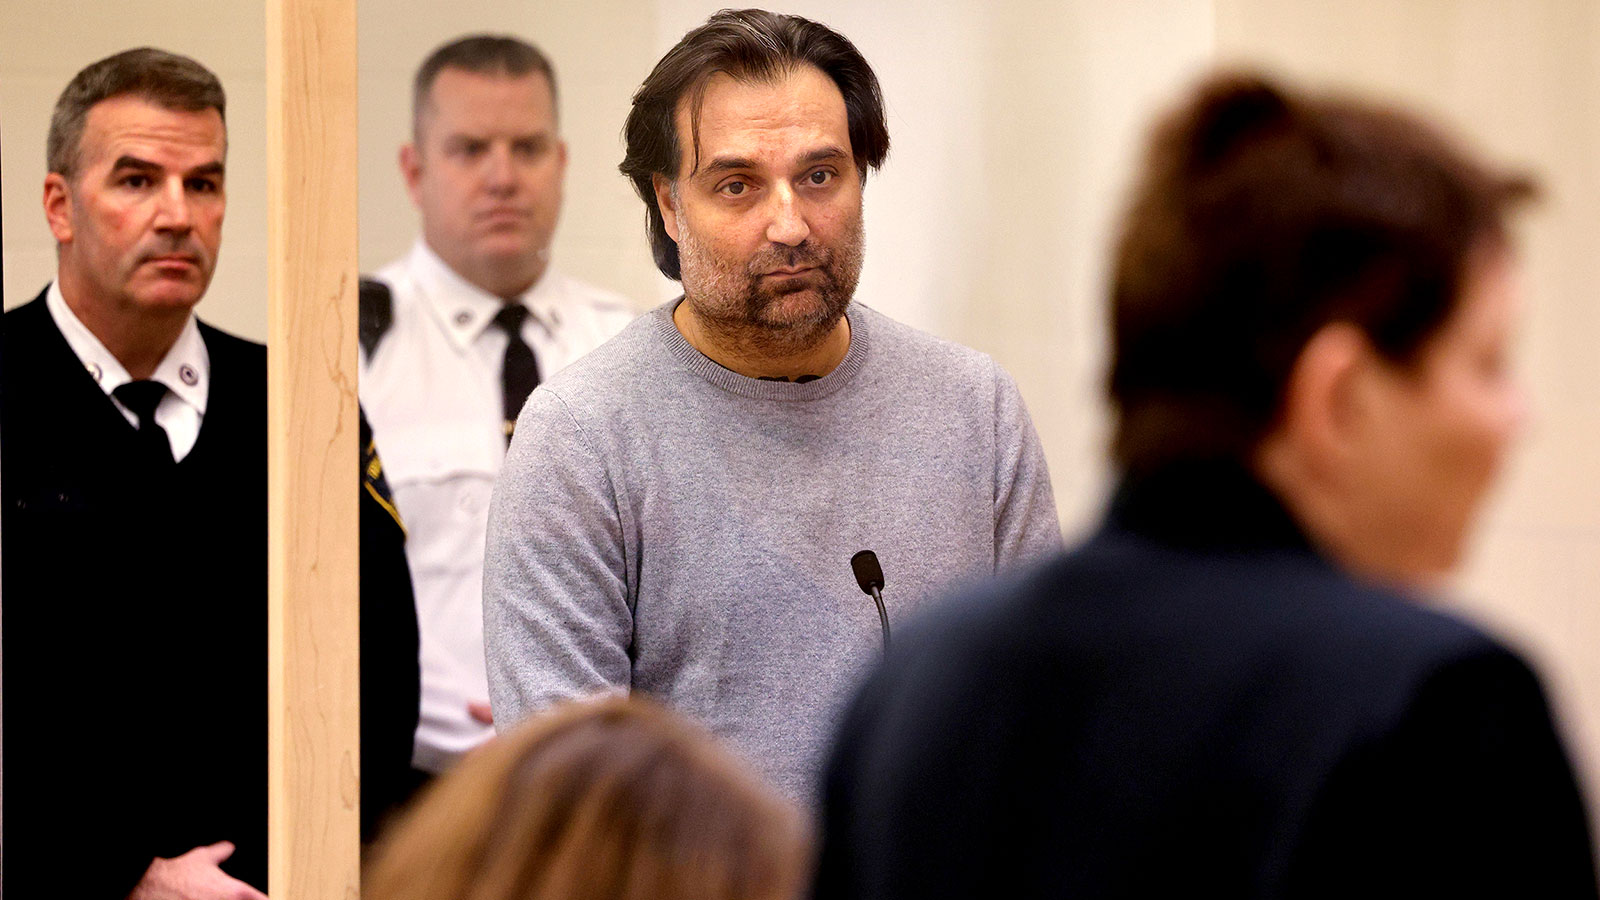 Brian Walshe, center, listens during his arraignment on January 18 at Quincy District Court, in Quincy, Massachusetts.